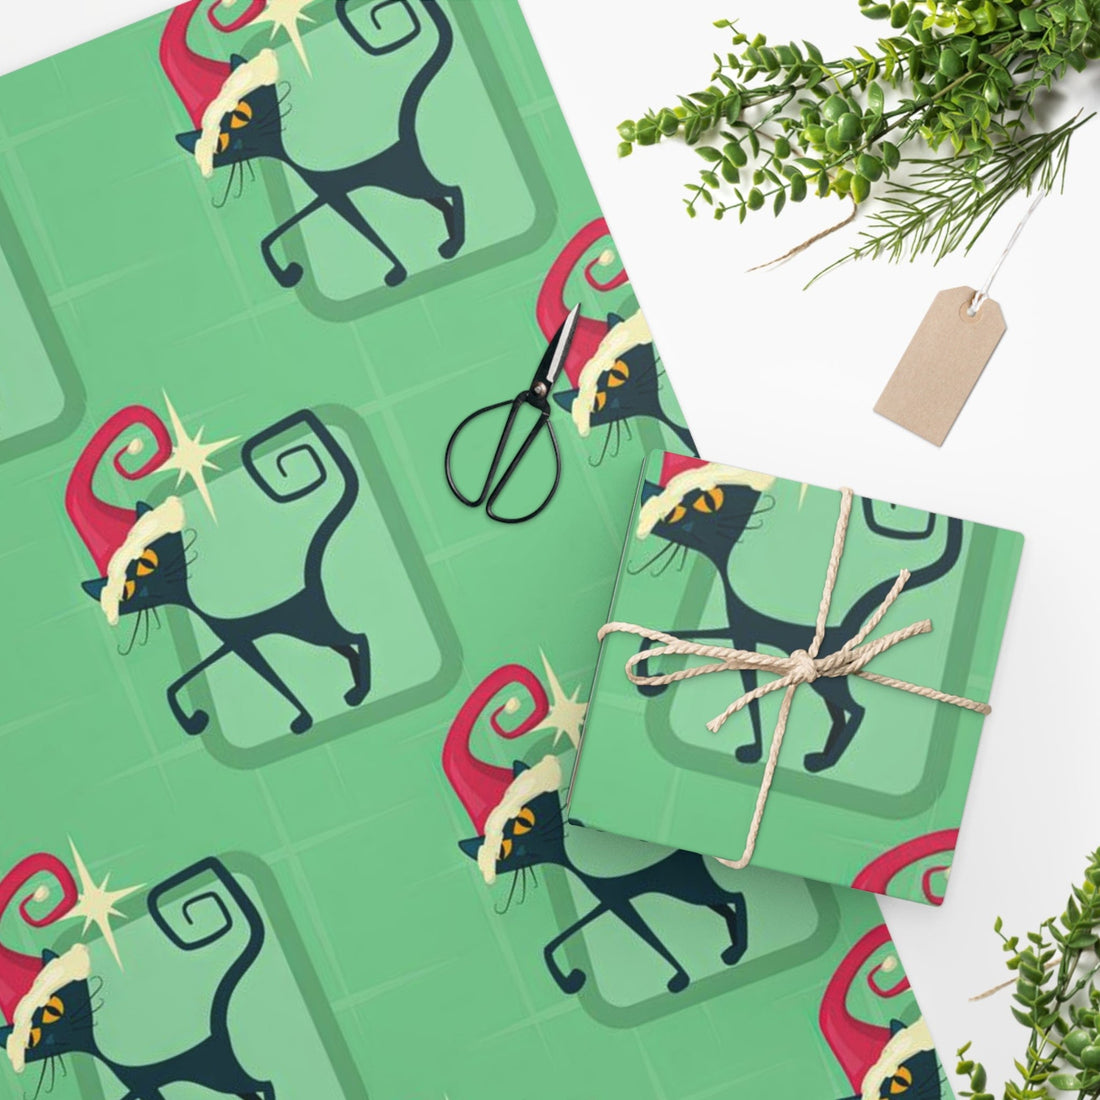 Kate McEnroe New York Mid Century Modern Atomic Cat Retro Christmas Wrapping Paper, MCM Green Kitschy Black Cats Holiday Gift WrapWrapping Paper22046511891249421990